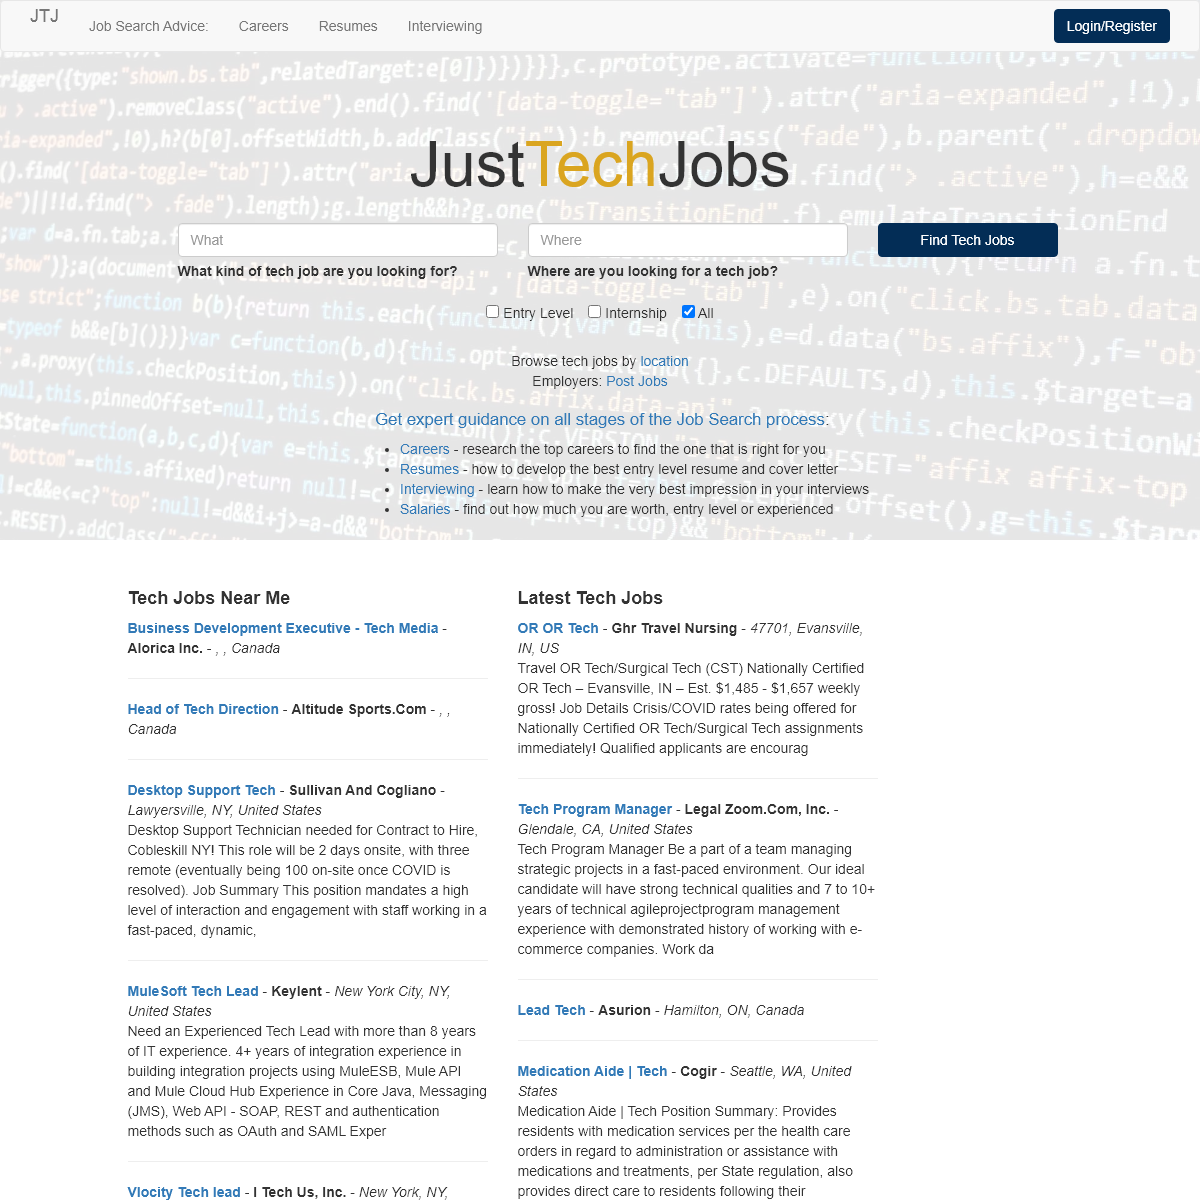 A complete backup of justtechjobs.com